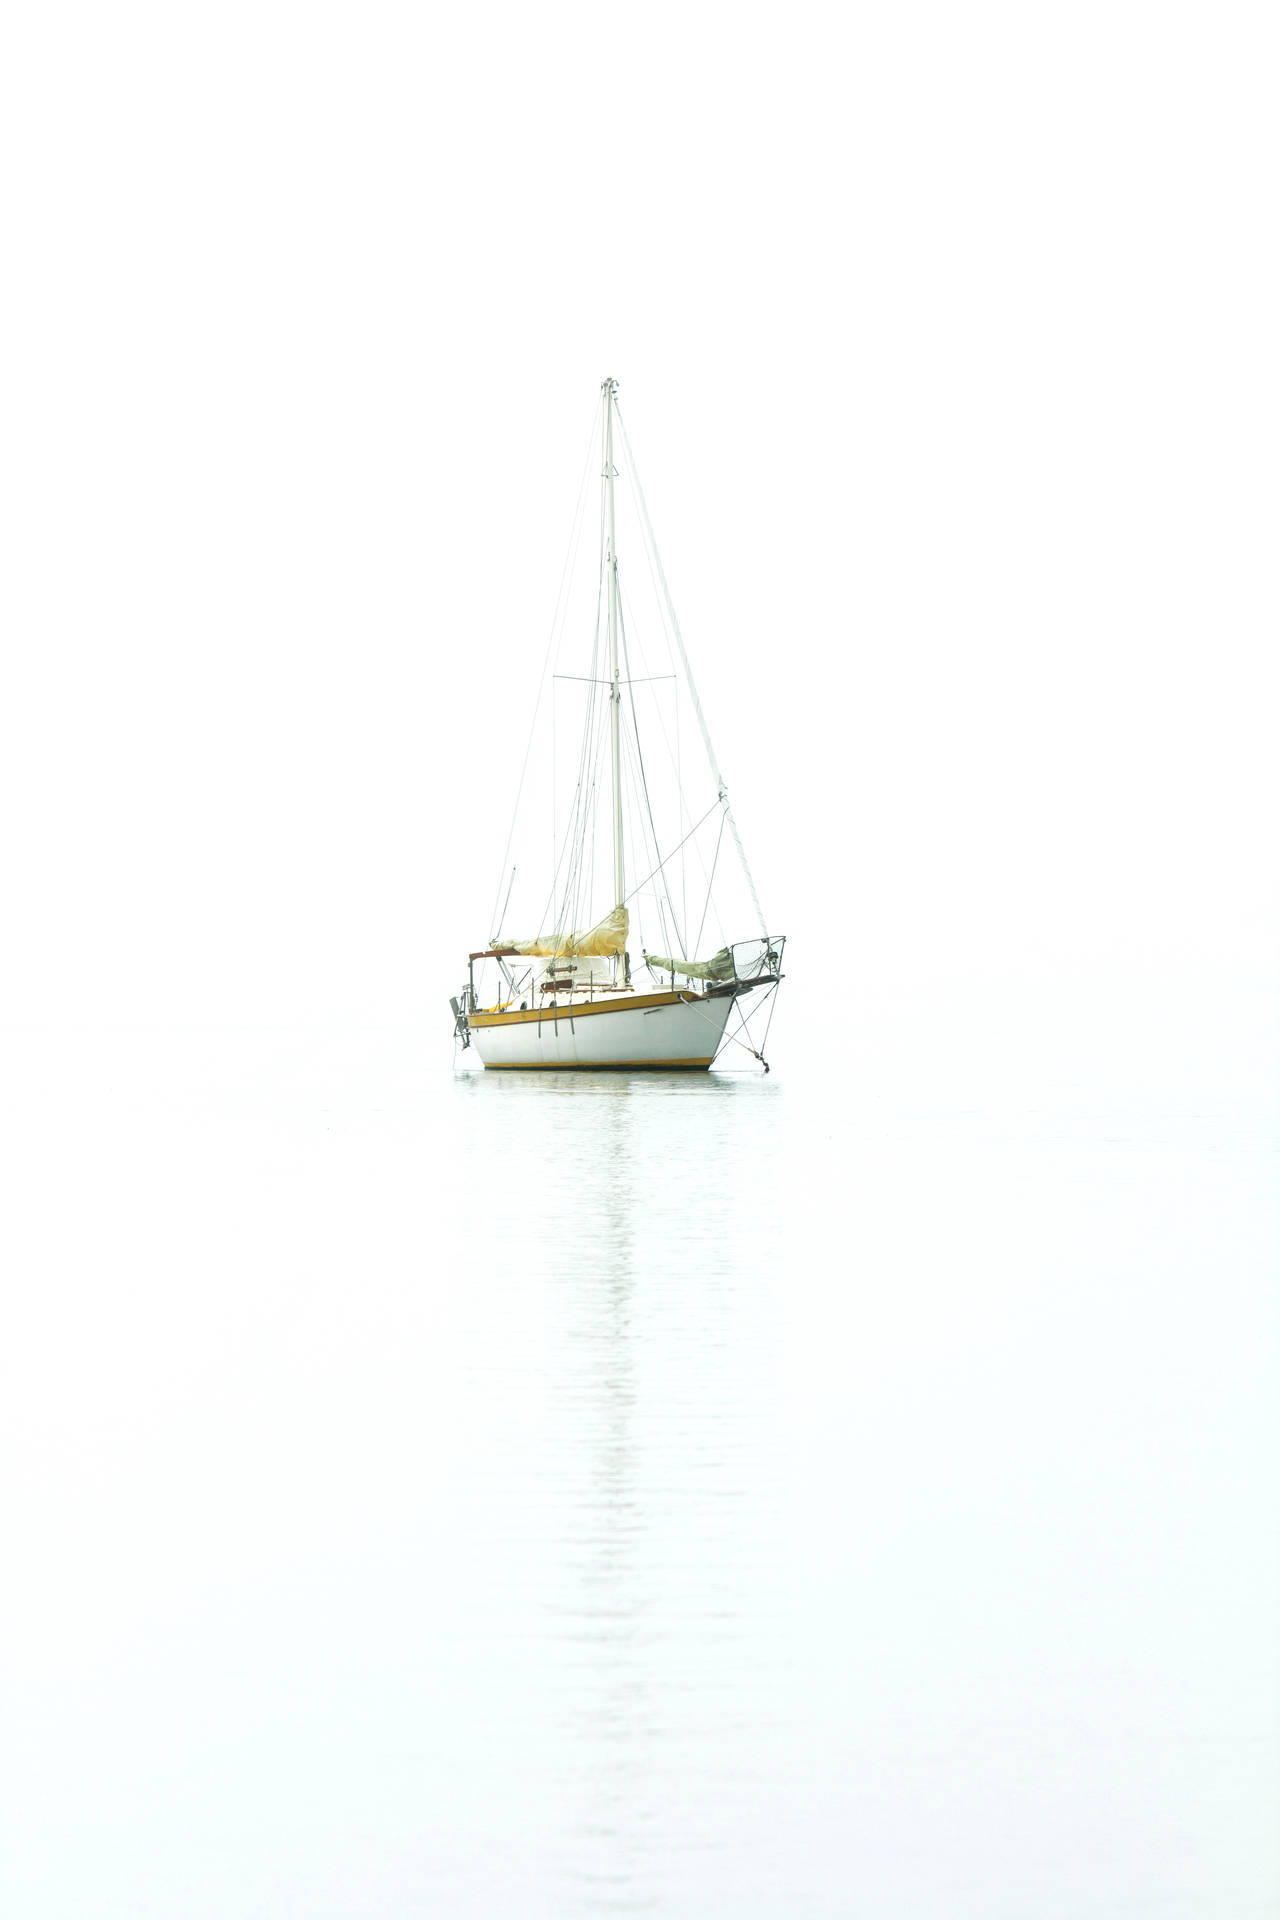 Boat 3456X5184 Wallpaper and Background Image